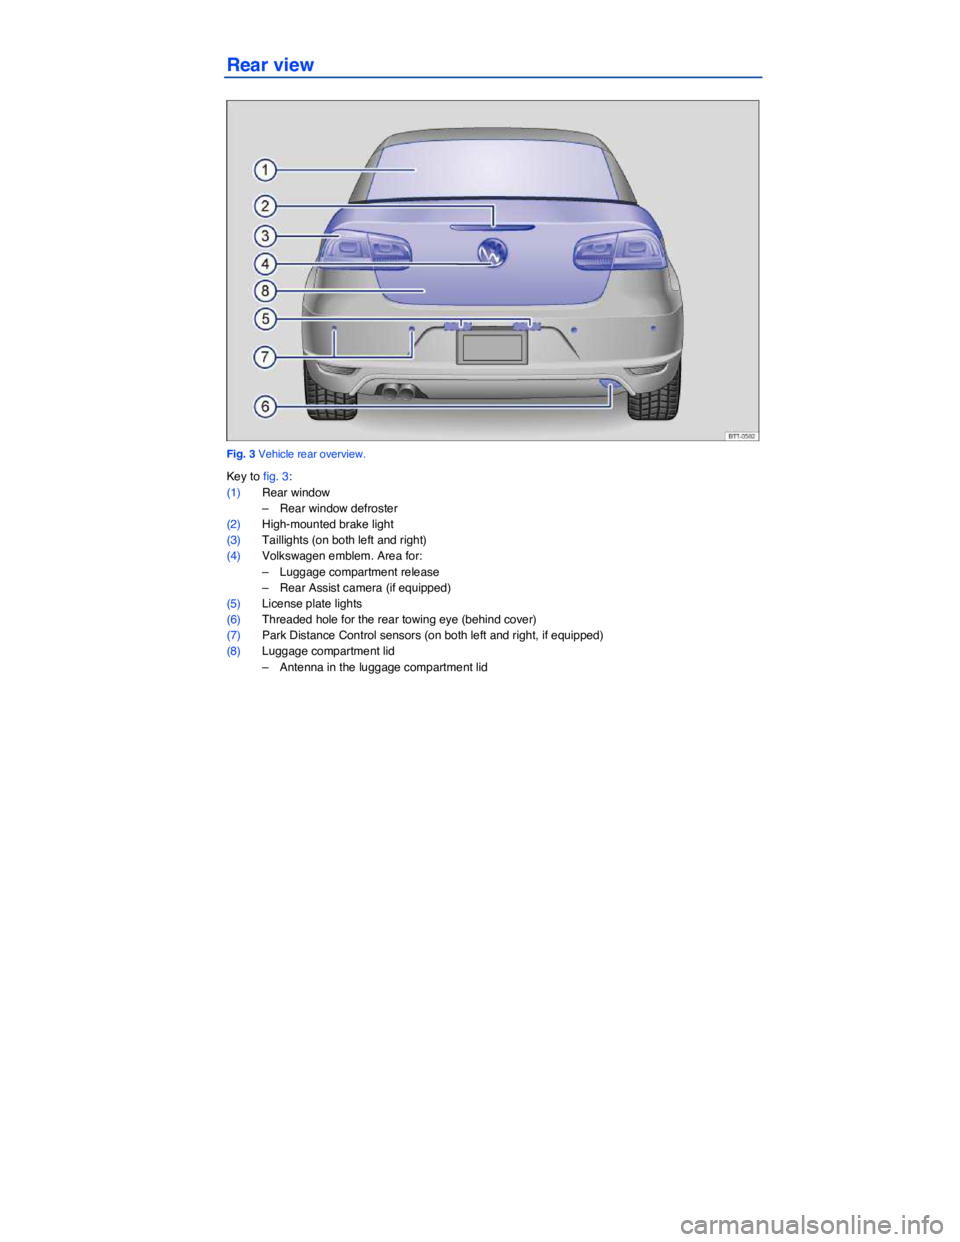 VOLKSWAGEN EOS 2009  Owners Manual  
 
Rear view 
 
Fig. 3 Vehicle rear overview. 
Key to fig. 3: 
(1) Rear window 
–  Rear window defroster  
(2) High-mounted brake light 
(3) Taillights (on both left and right)  
(4) Volkswagen emb